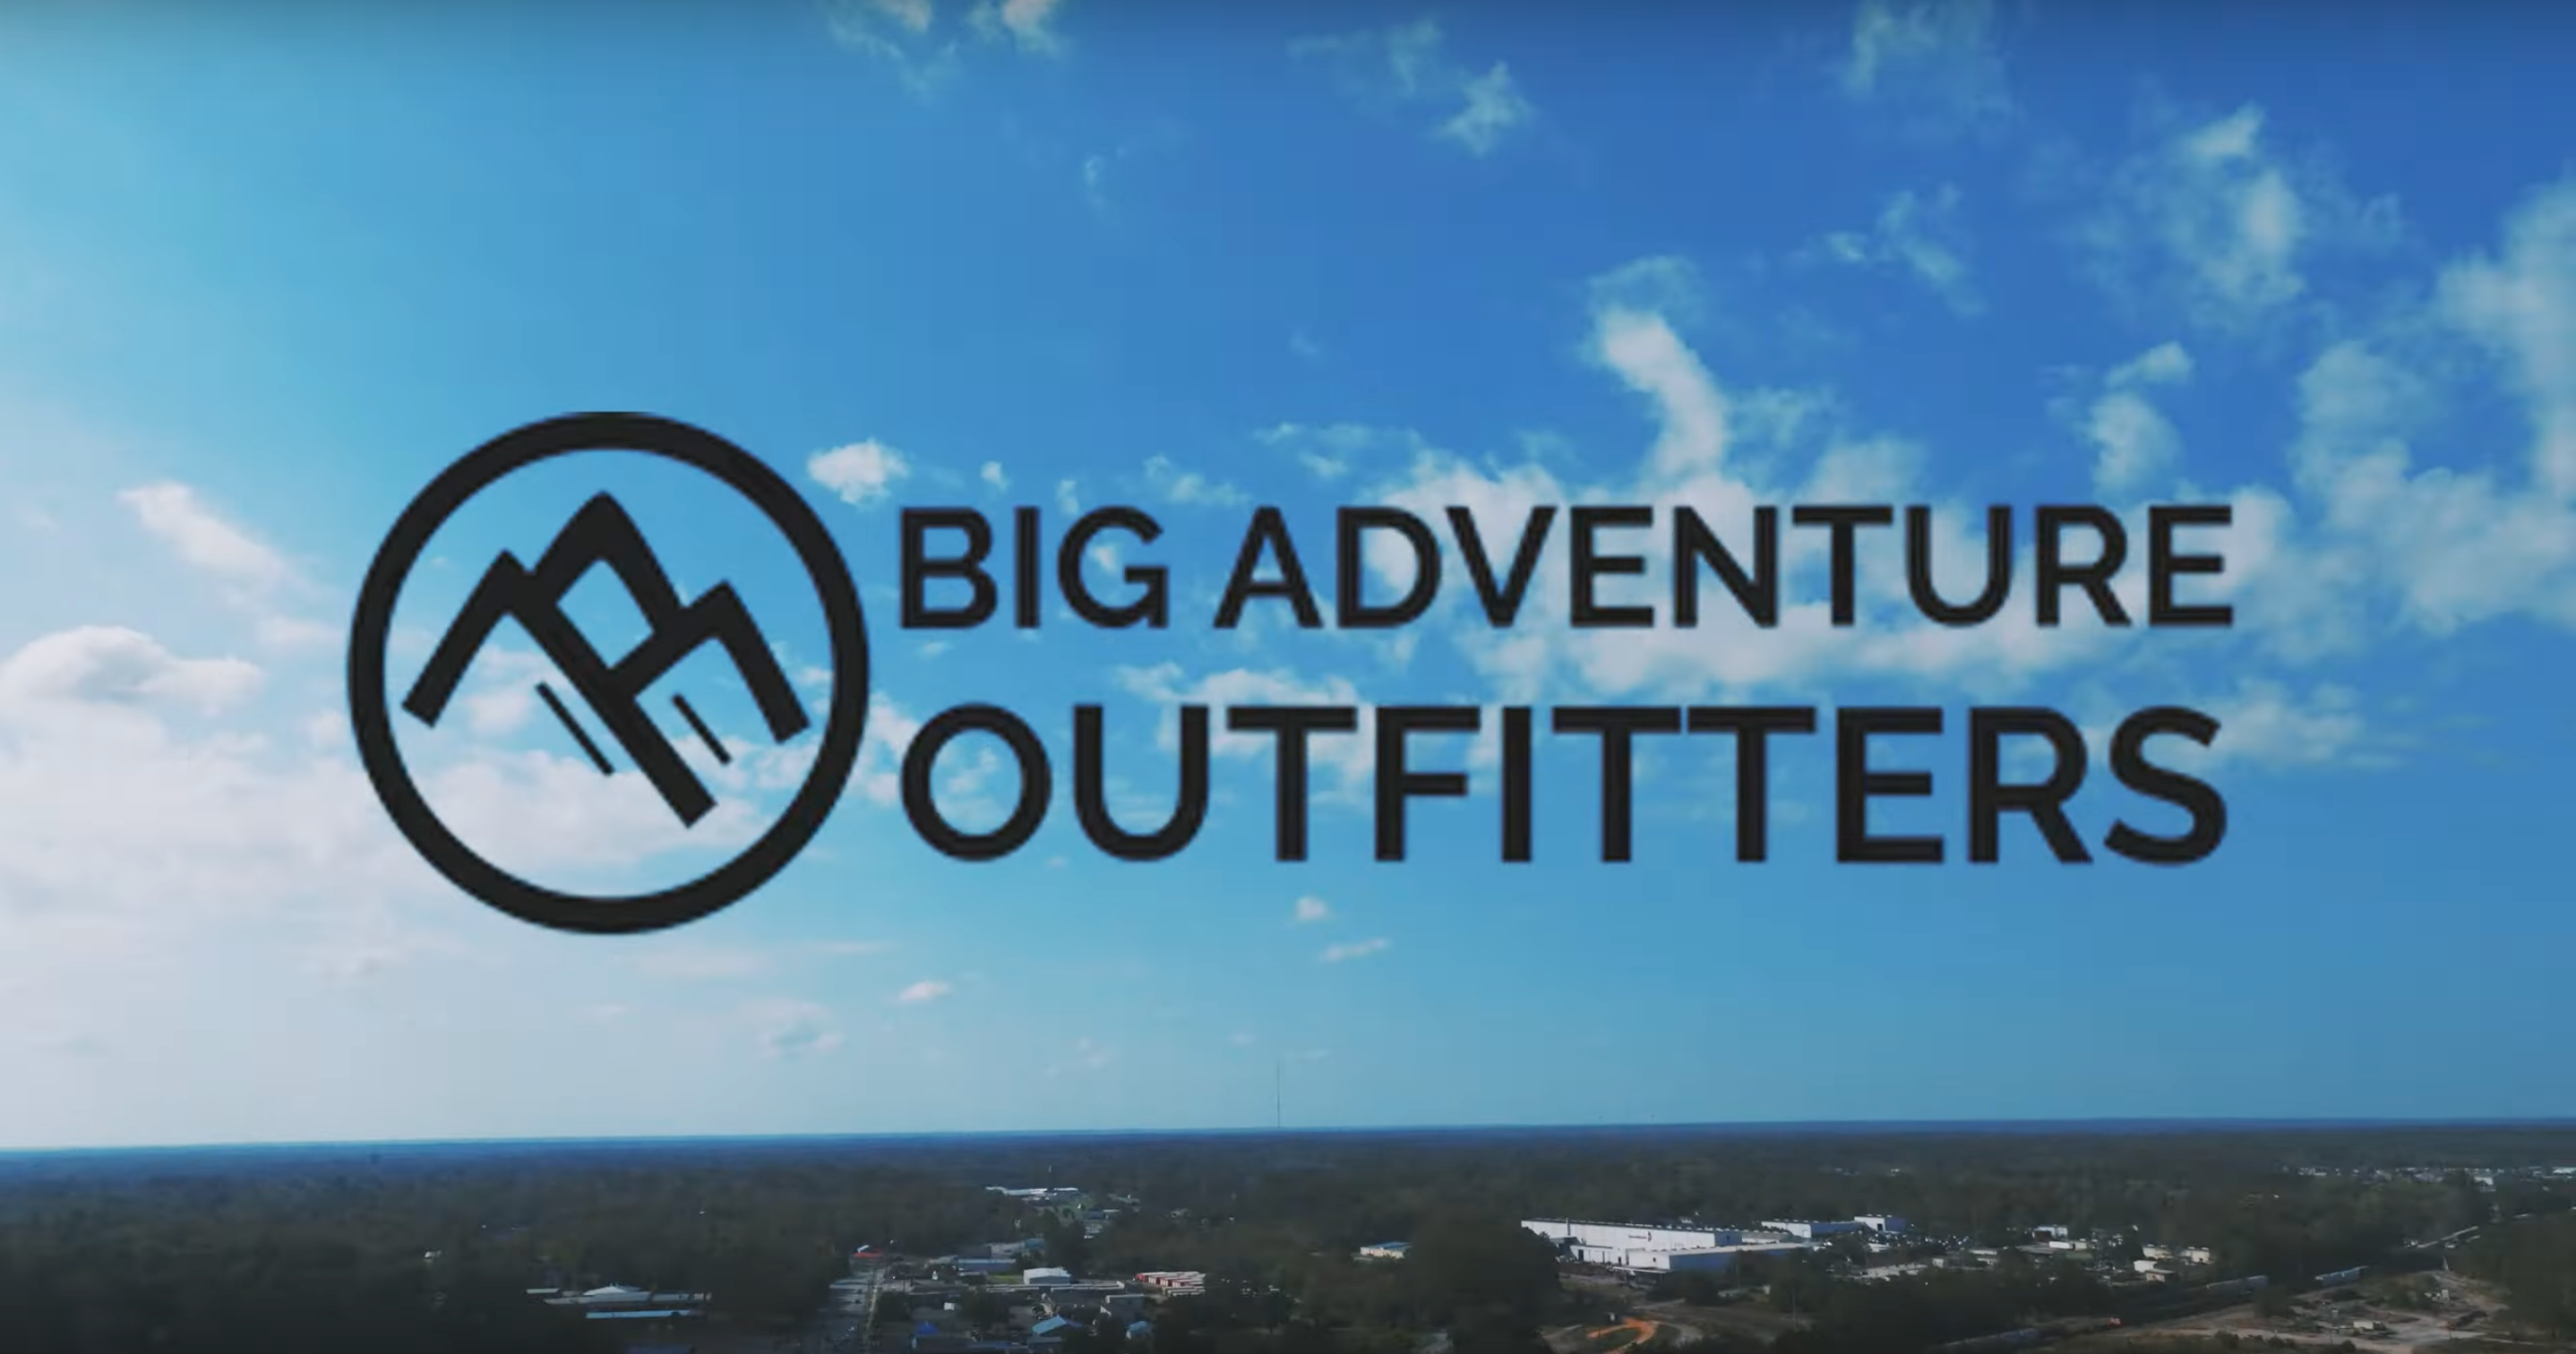 Load video: Commercial showing our team heading out for a camping trip in the woods